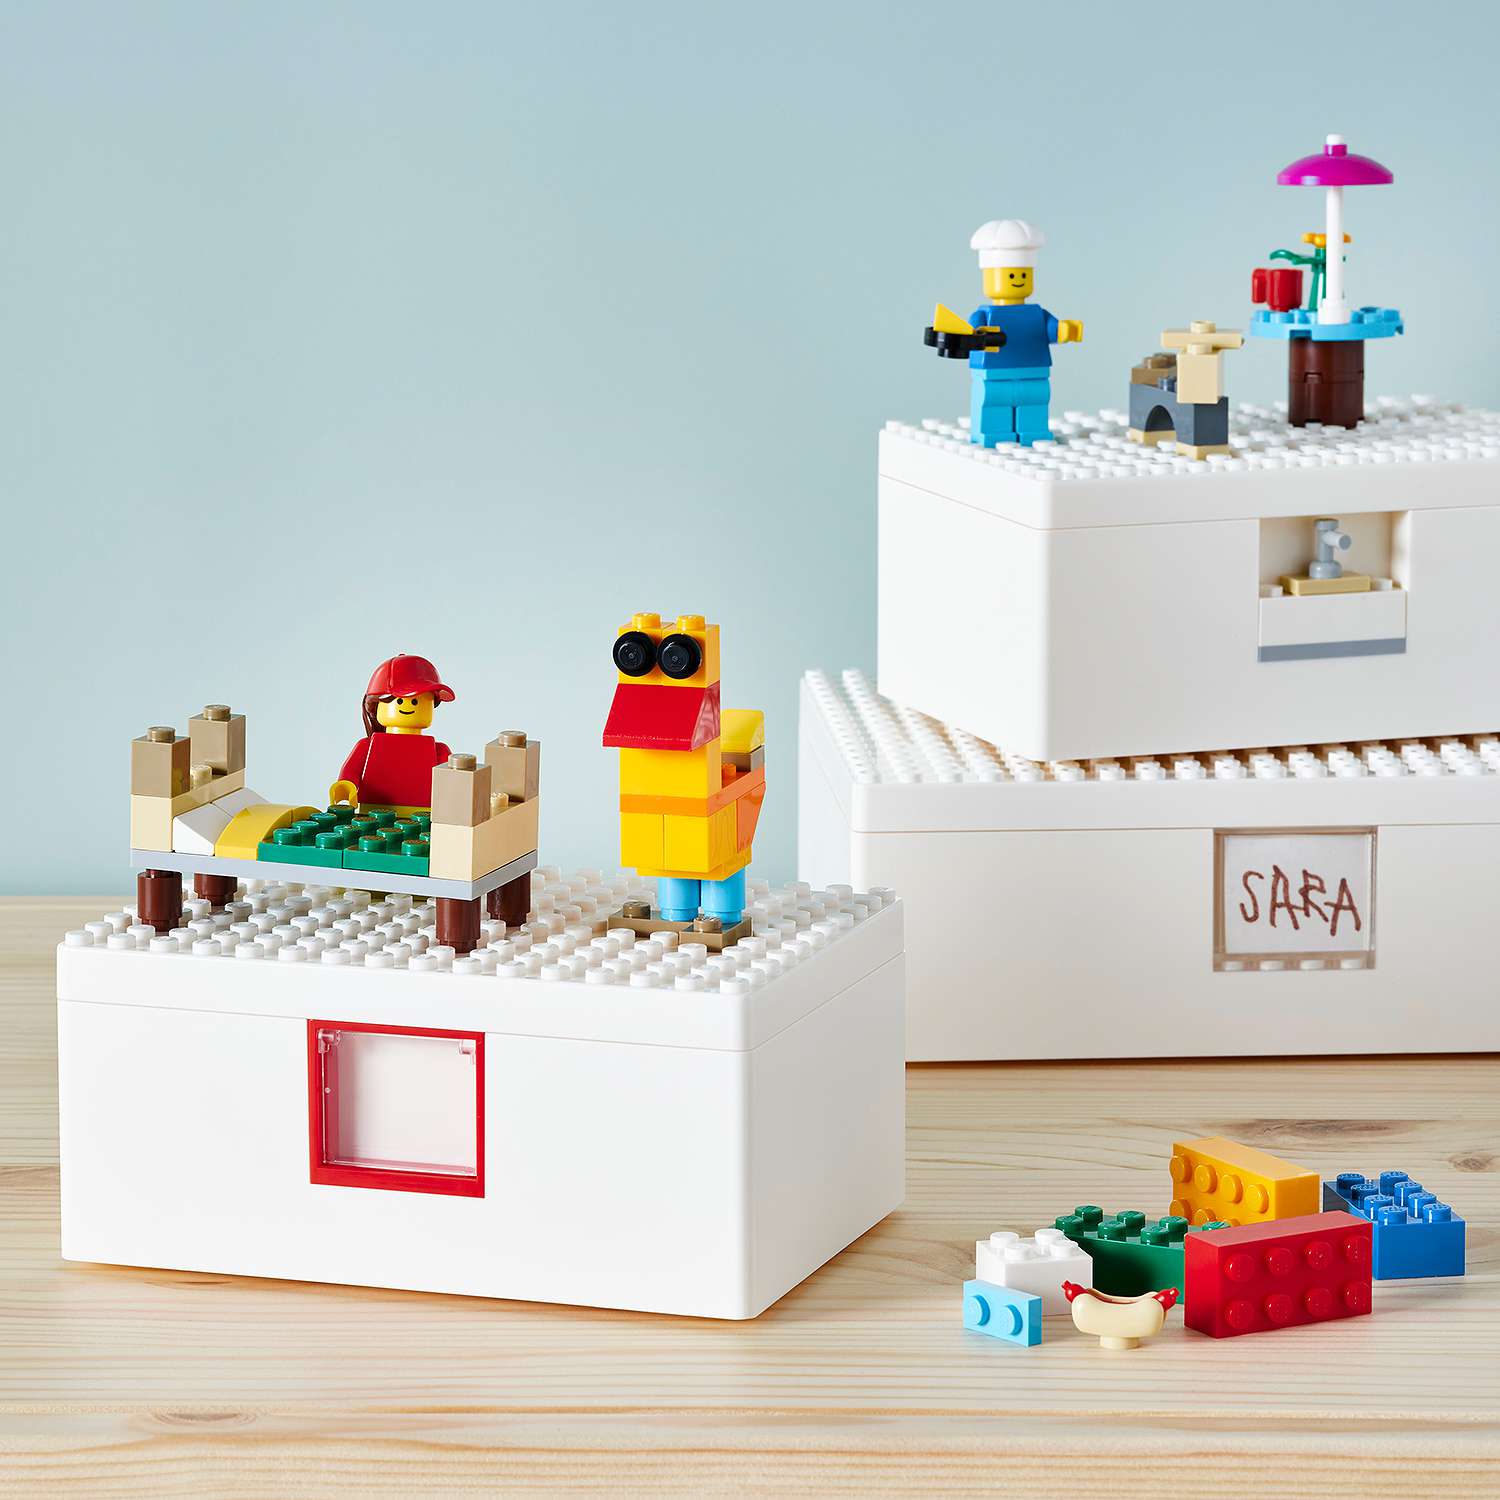 IKEA Teams Up with LEGO for New Storage 